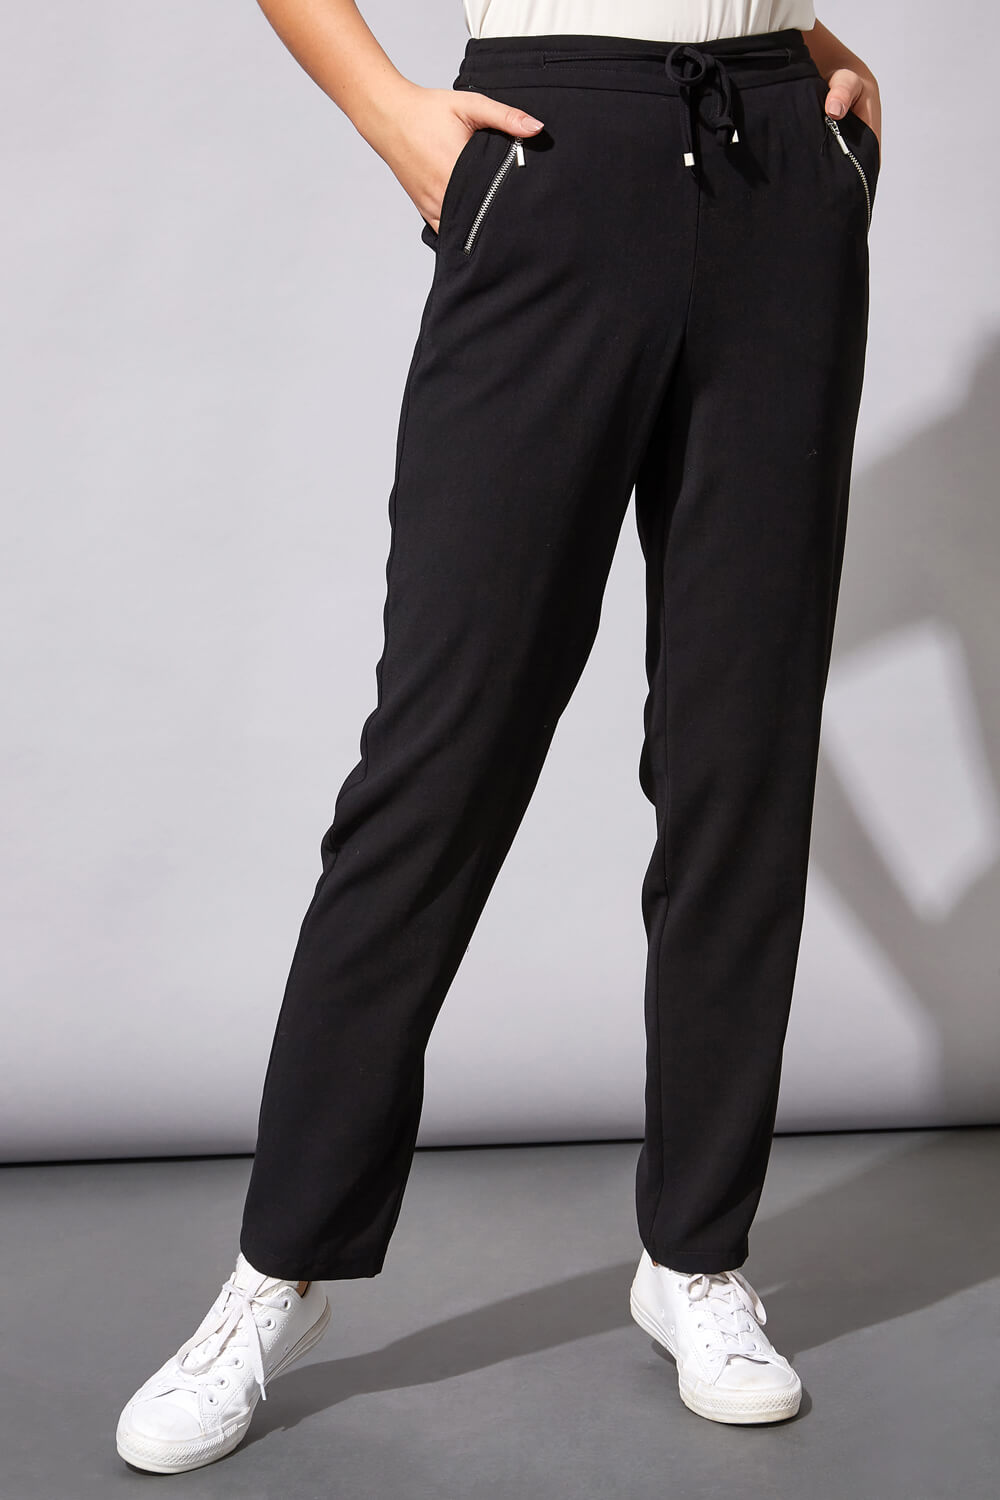 29 Inch Tie Front Jogger